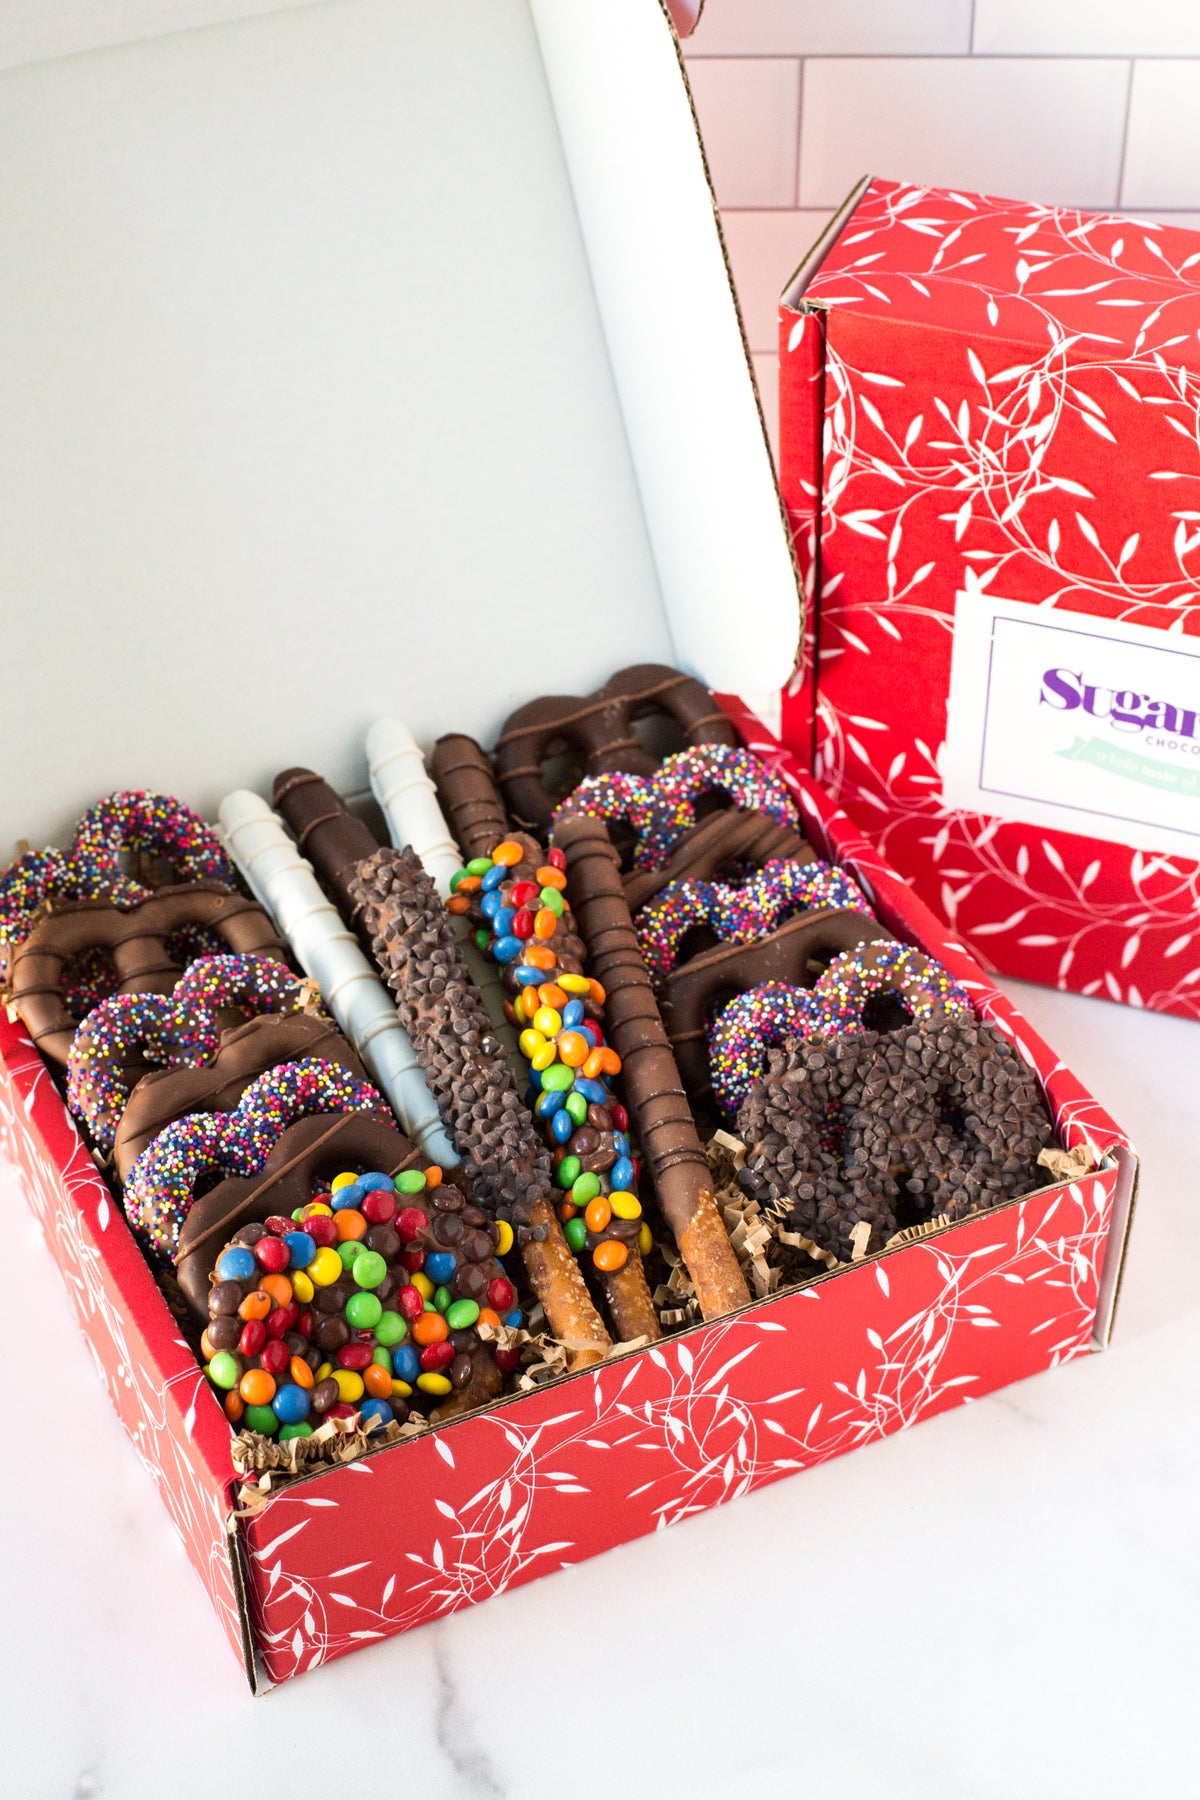 Open box of Sugar Plum&#39;s Chocolate Pretzel Passion Gift Tray that includes 22 pieces of assorted chocolate-dipped pretzels, including pretzel logs covered in chocolate candy pieces, chocolate sandwich cookie logs, double chocolate chip pretzels, nonpareil pretzels, candied chocolate gem pretzels, and pretzels dipped in signature milk, dark, and white chocolates.